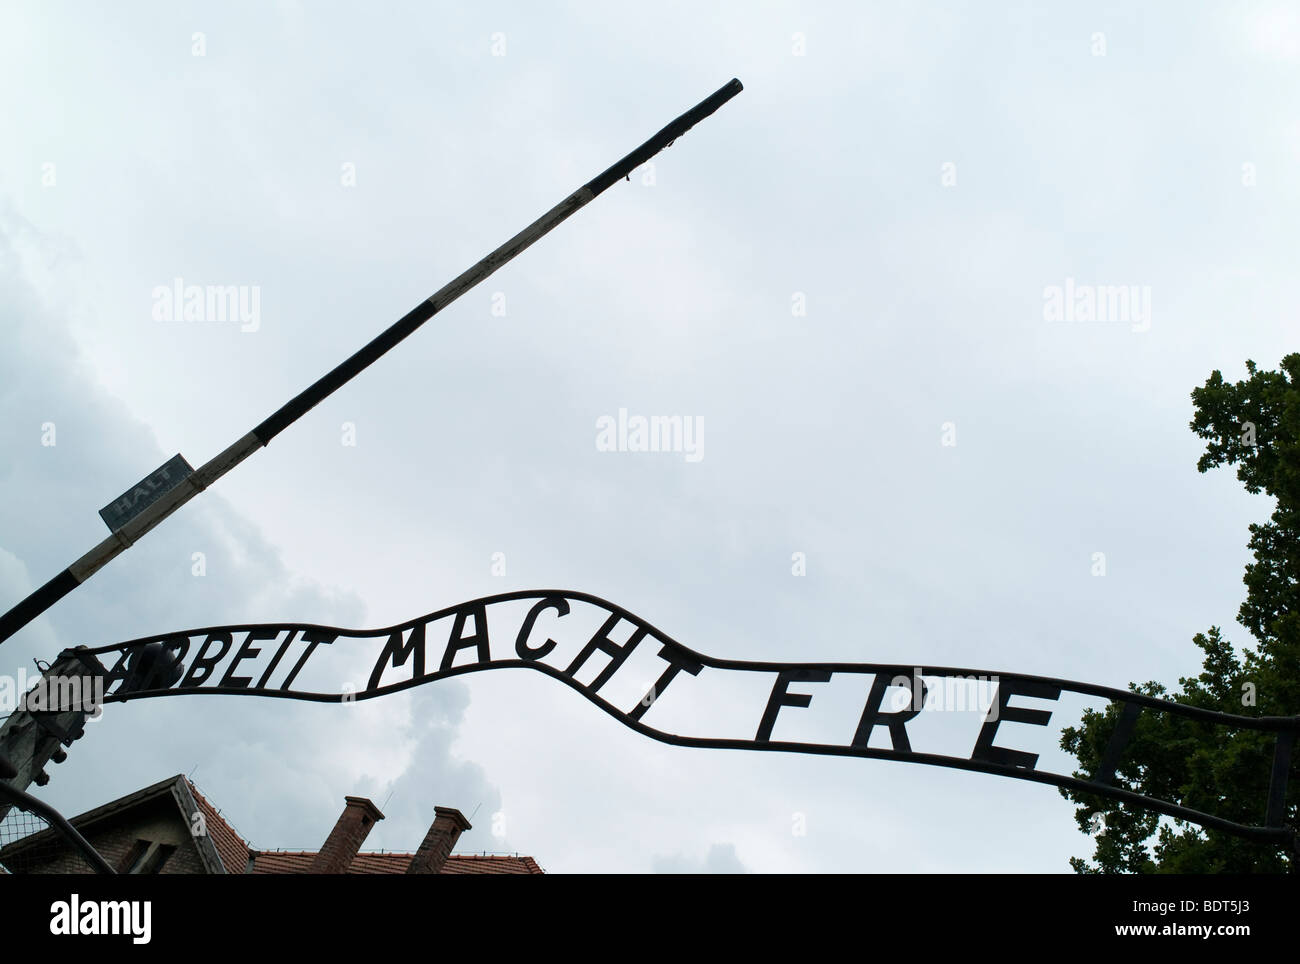 Arbeit macht frei! Slogan at the entrance of Auschwitz, World War 2 concentration camp. Stock Photo